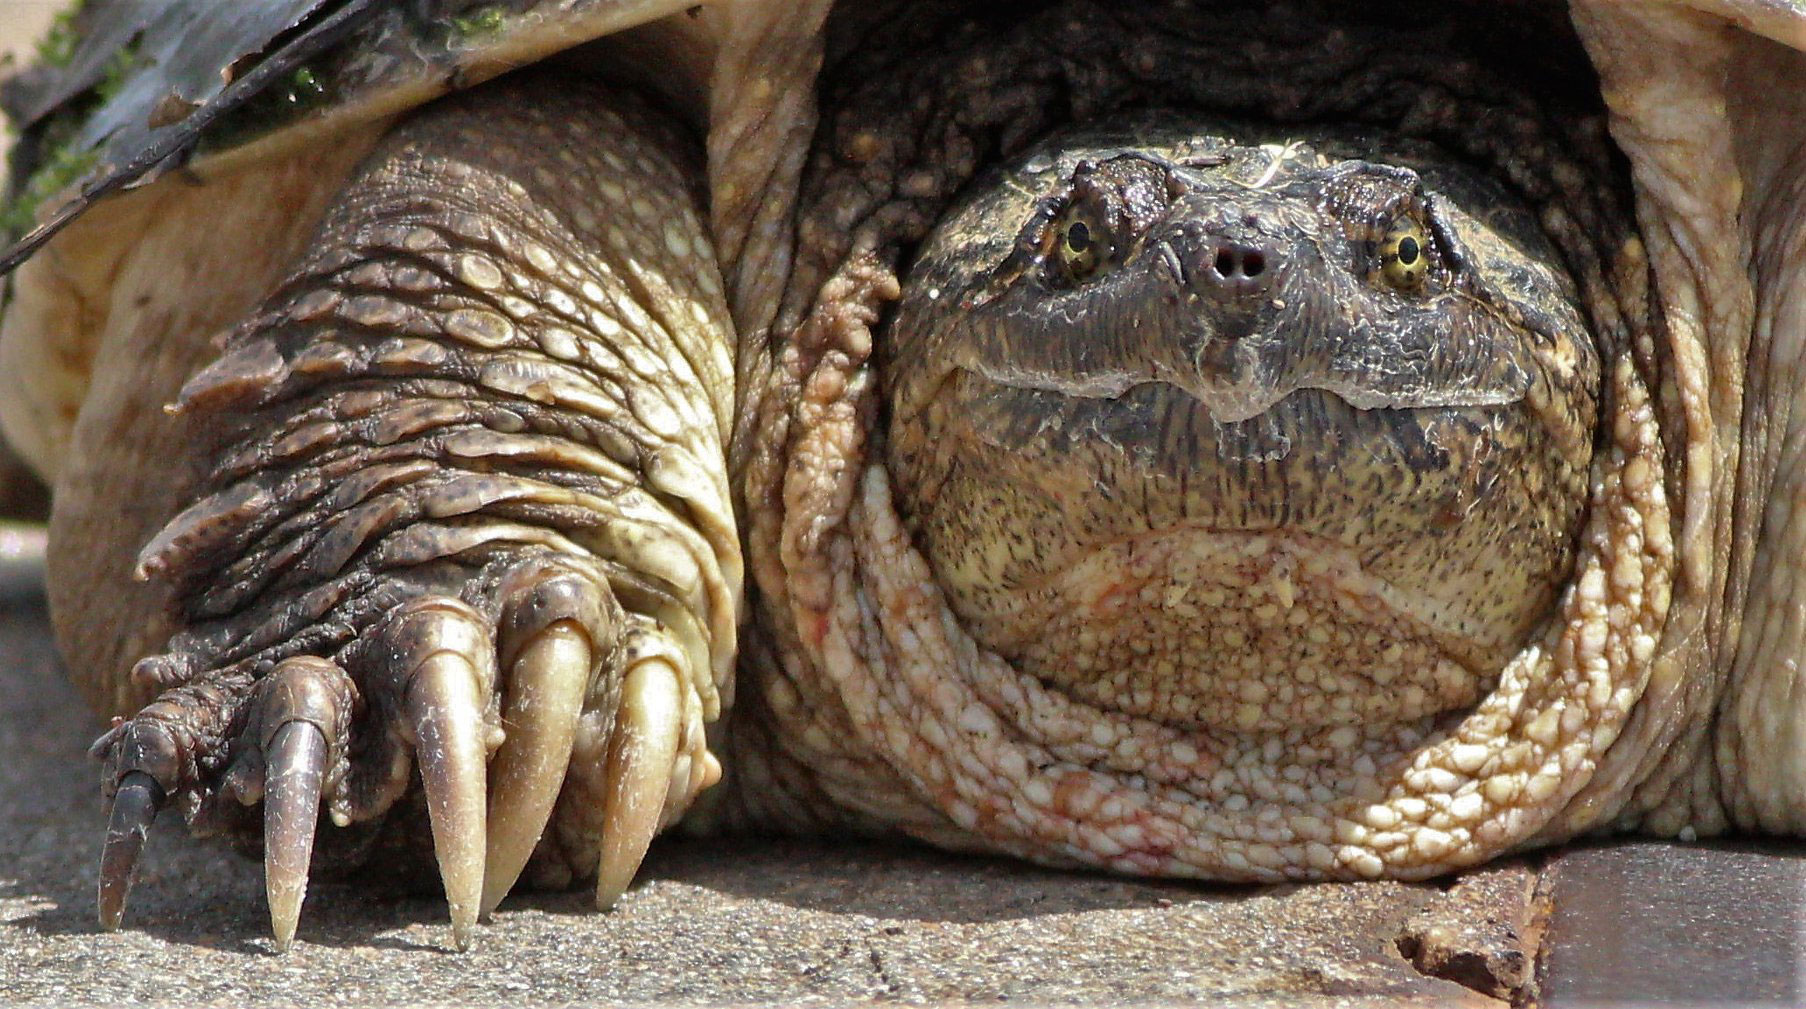 Nature curiosity: Why and how do turtles breathe with their butts